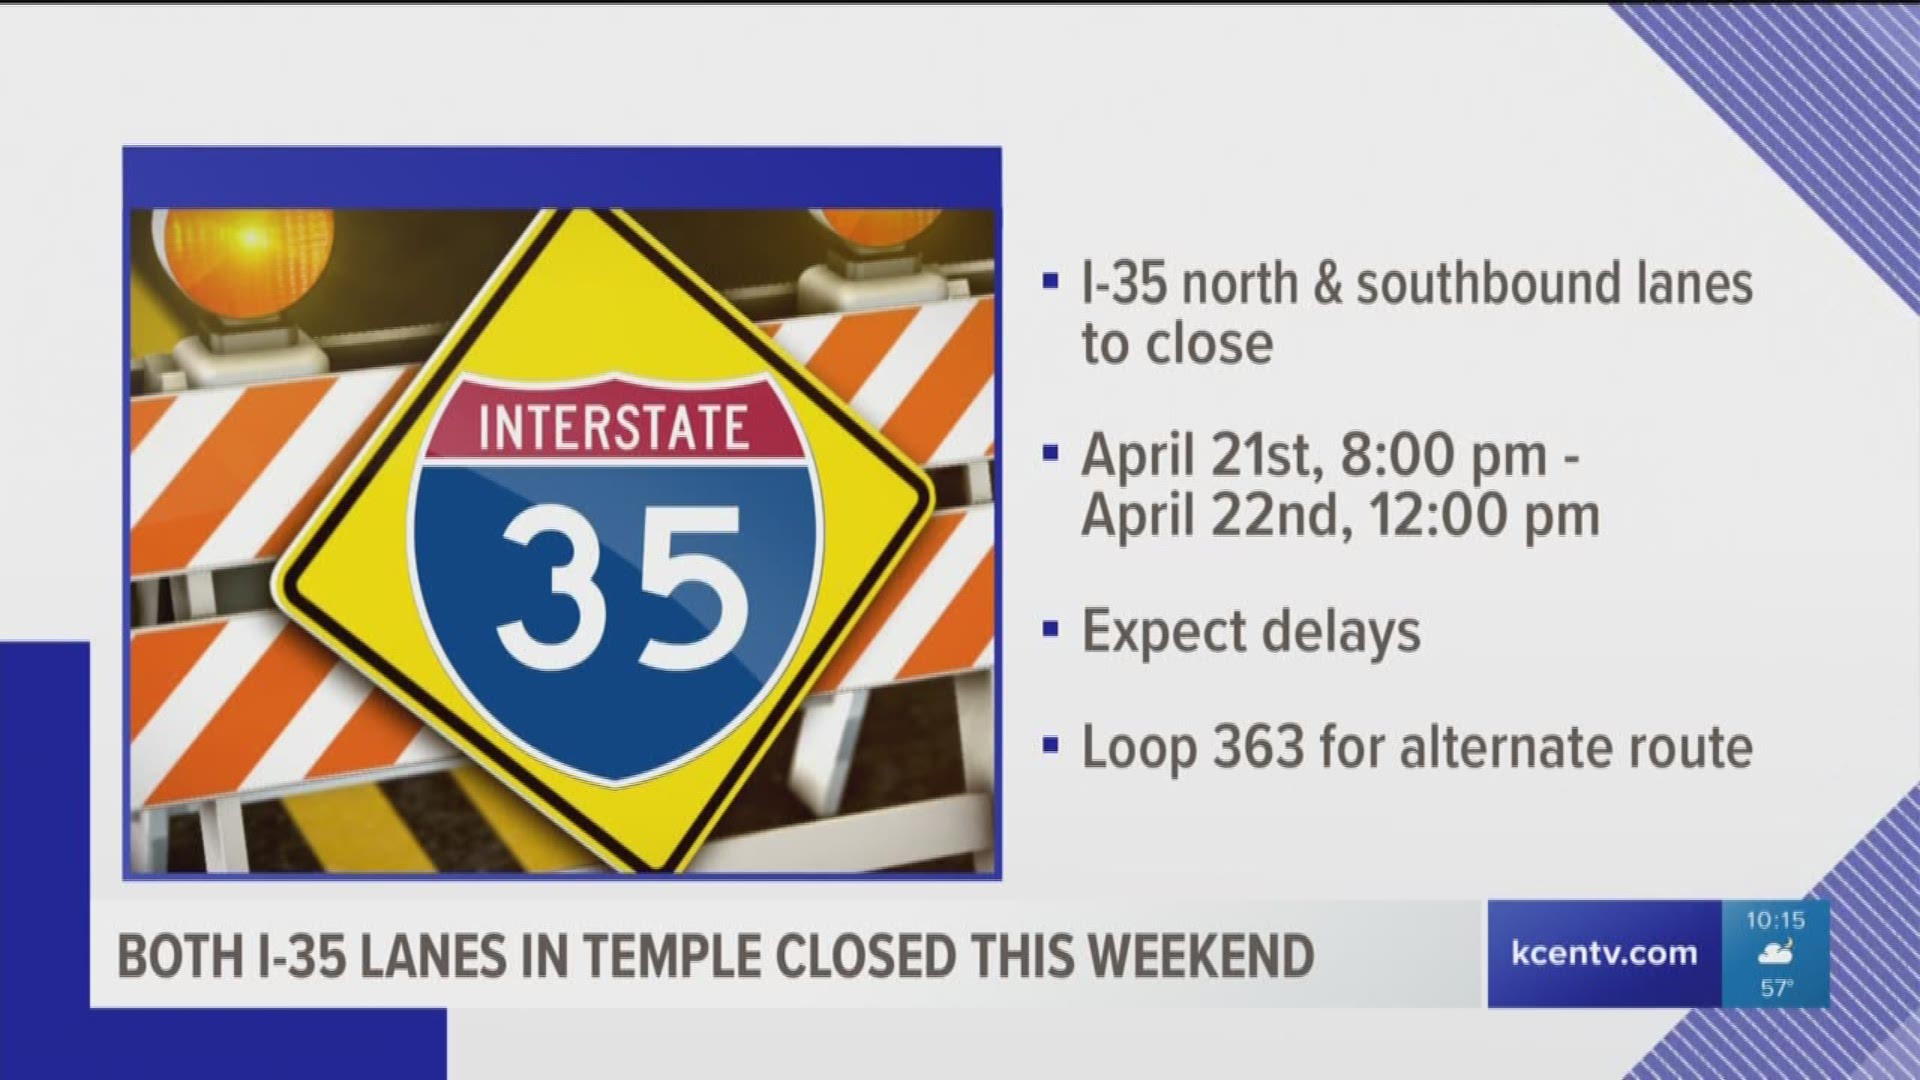 Traffic Alert for those of you in Temple this weekend. 